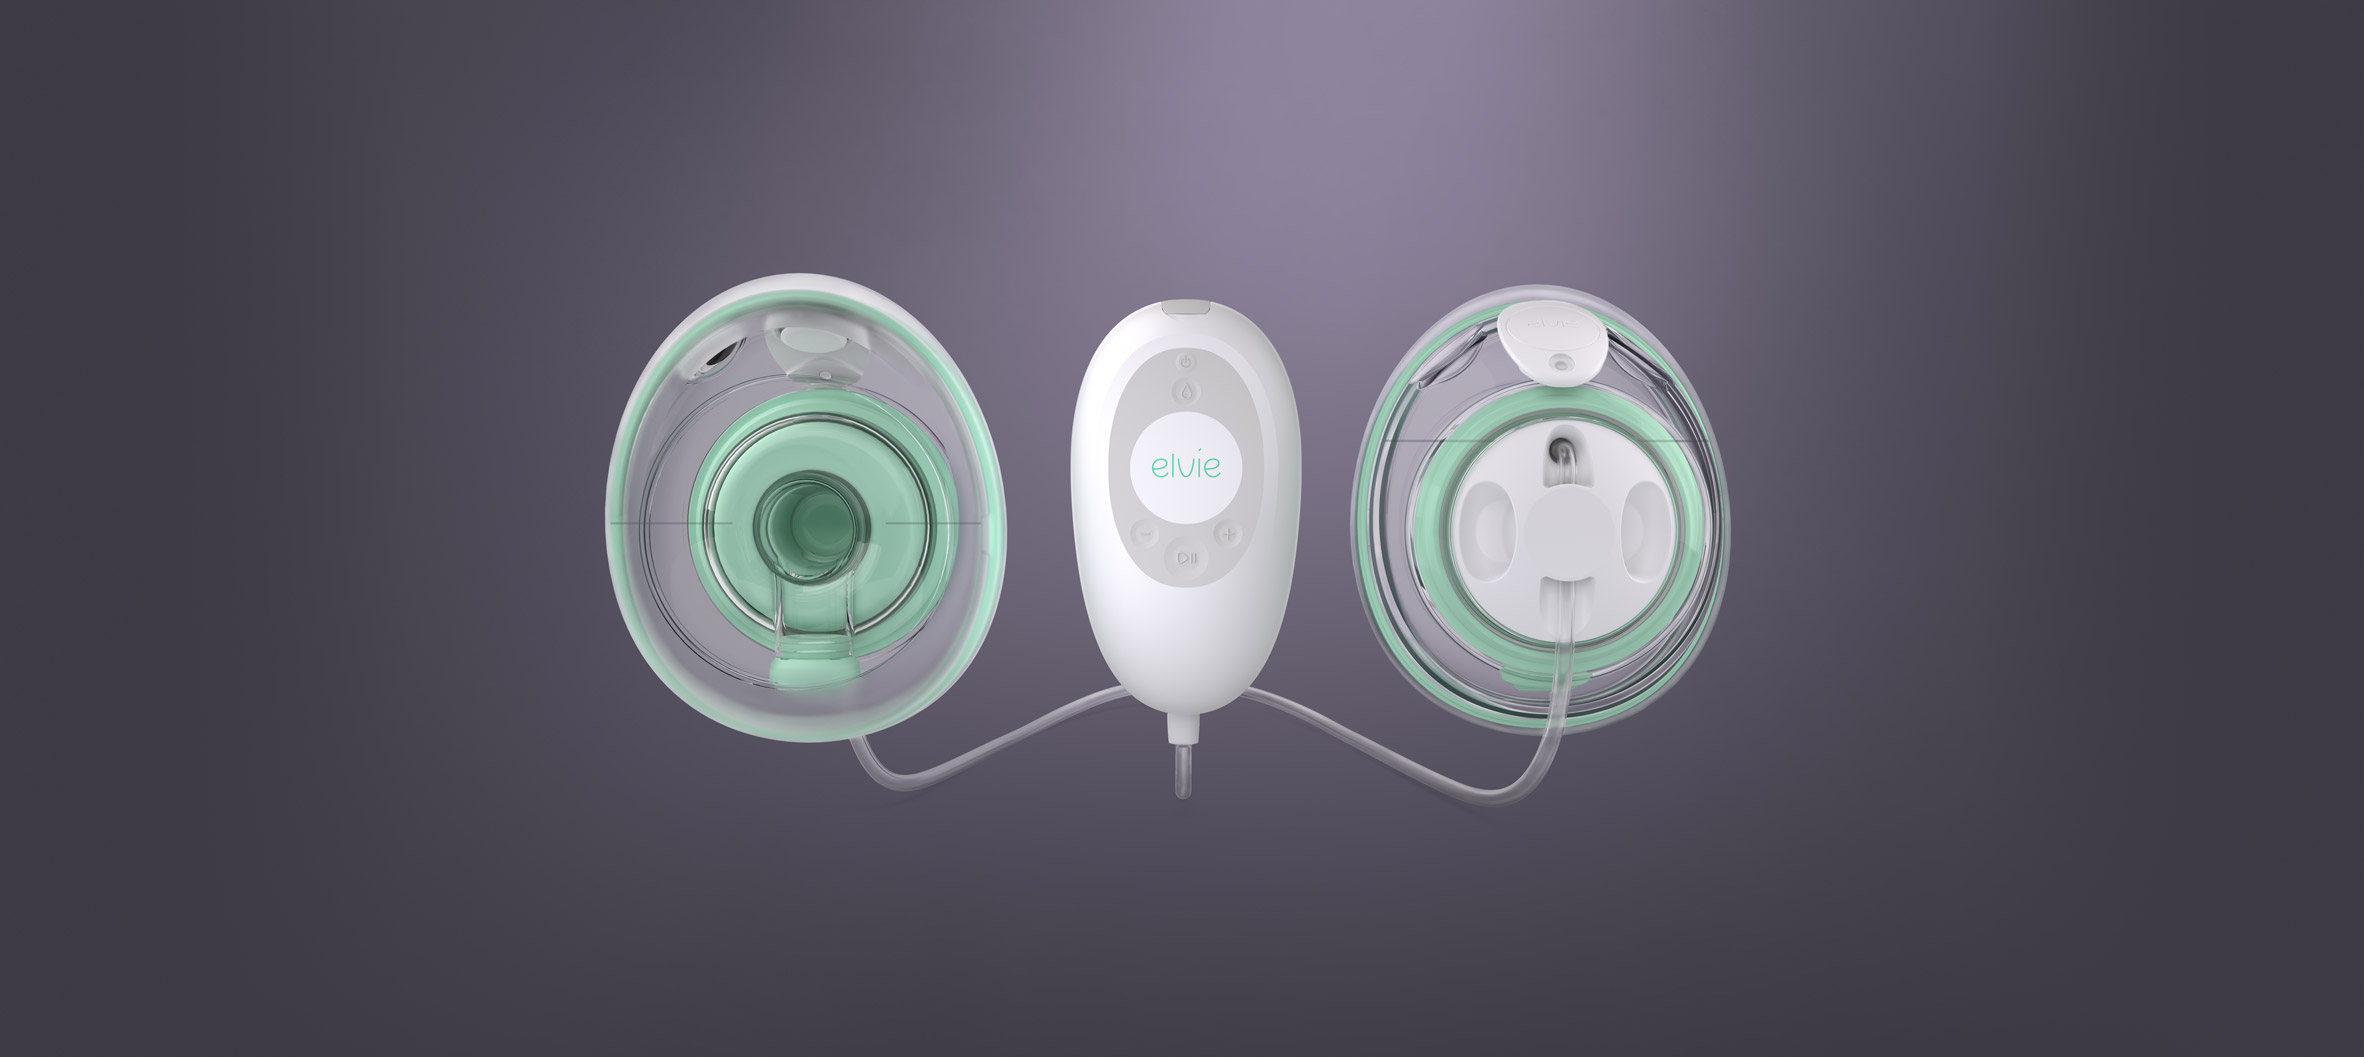 Elvie Stride is a hospital-grade breast pump that can be worn under clothes